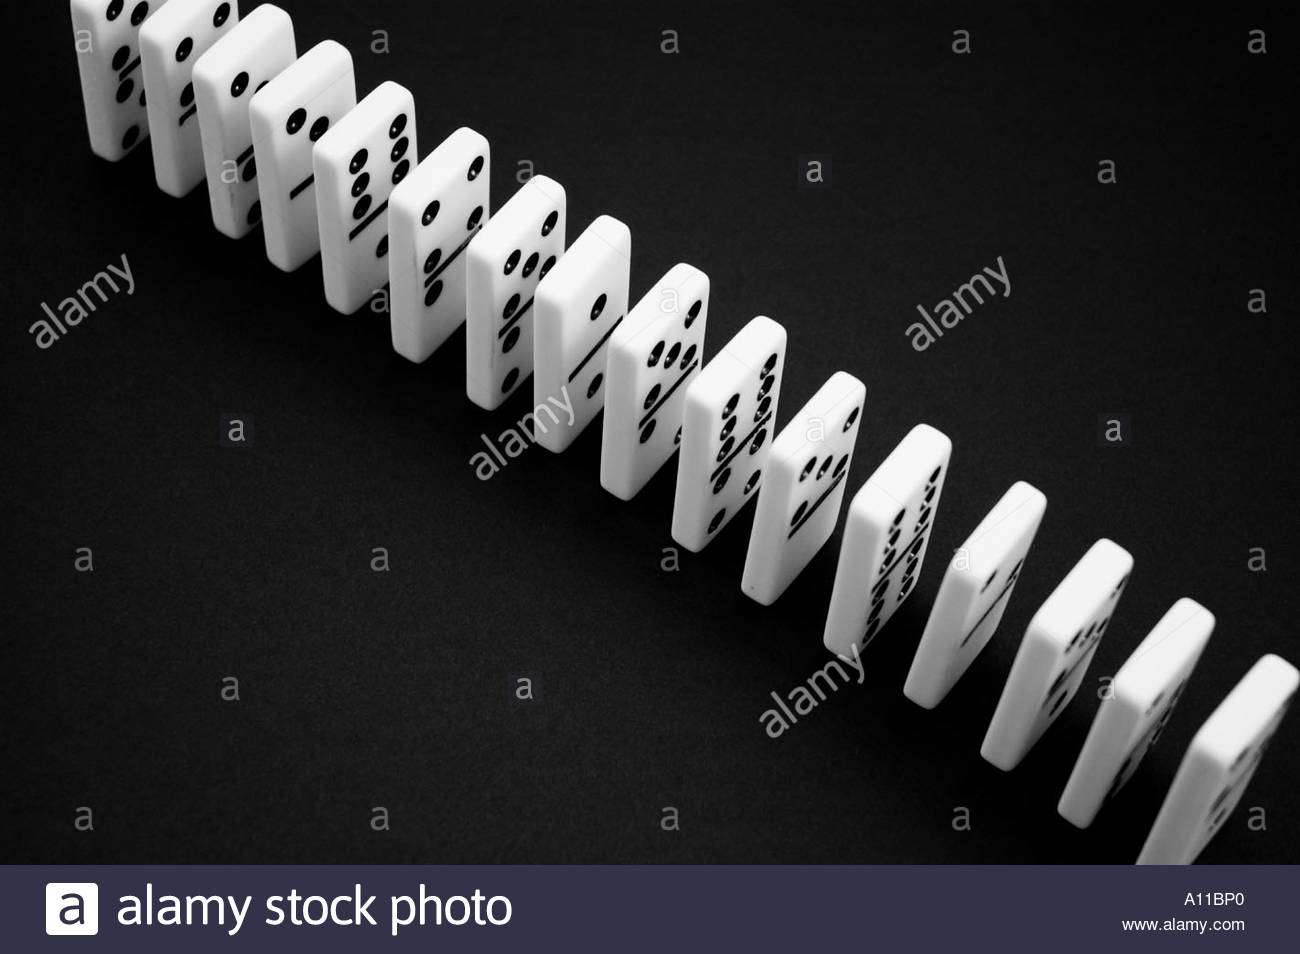 Dominos in a row on a black background Stock Photo 5777823   Alamy